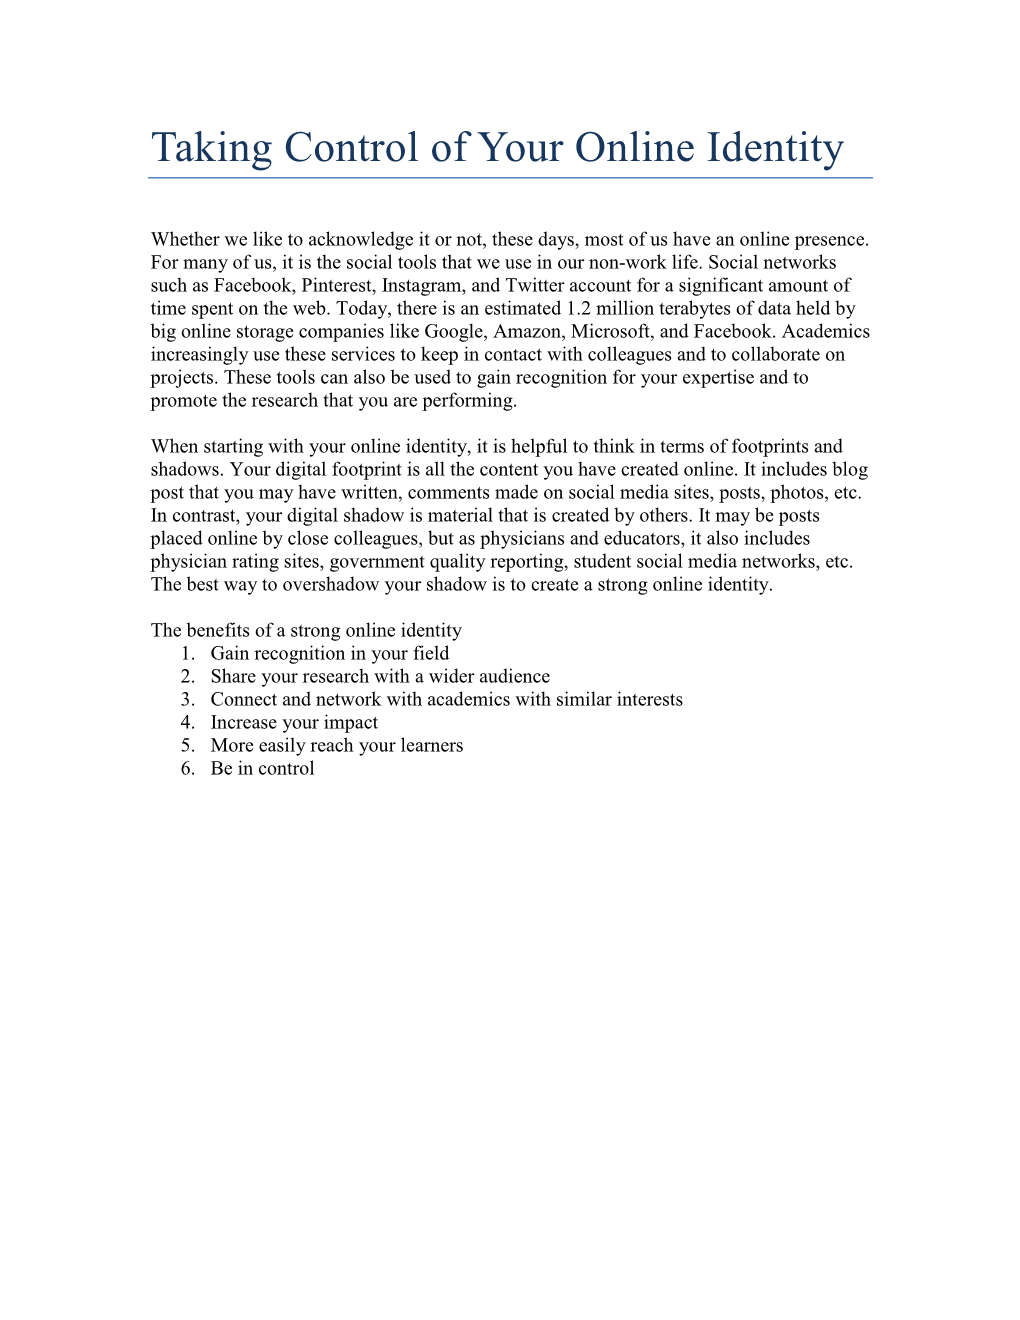 Taking Control of Your Online Identity